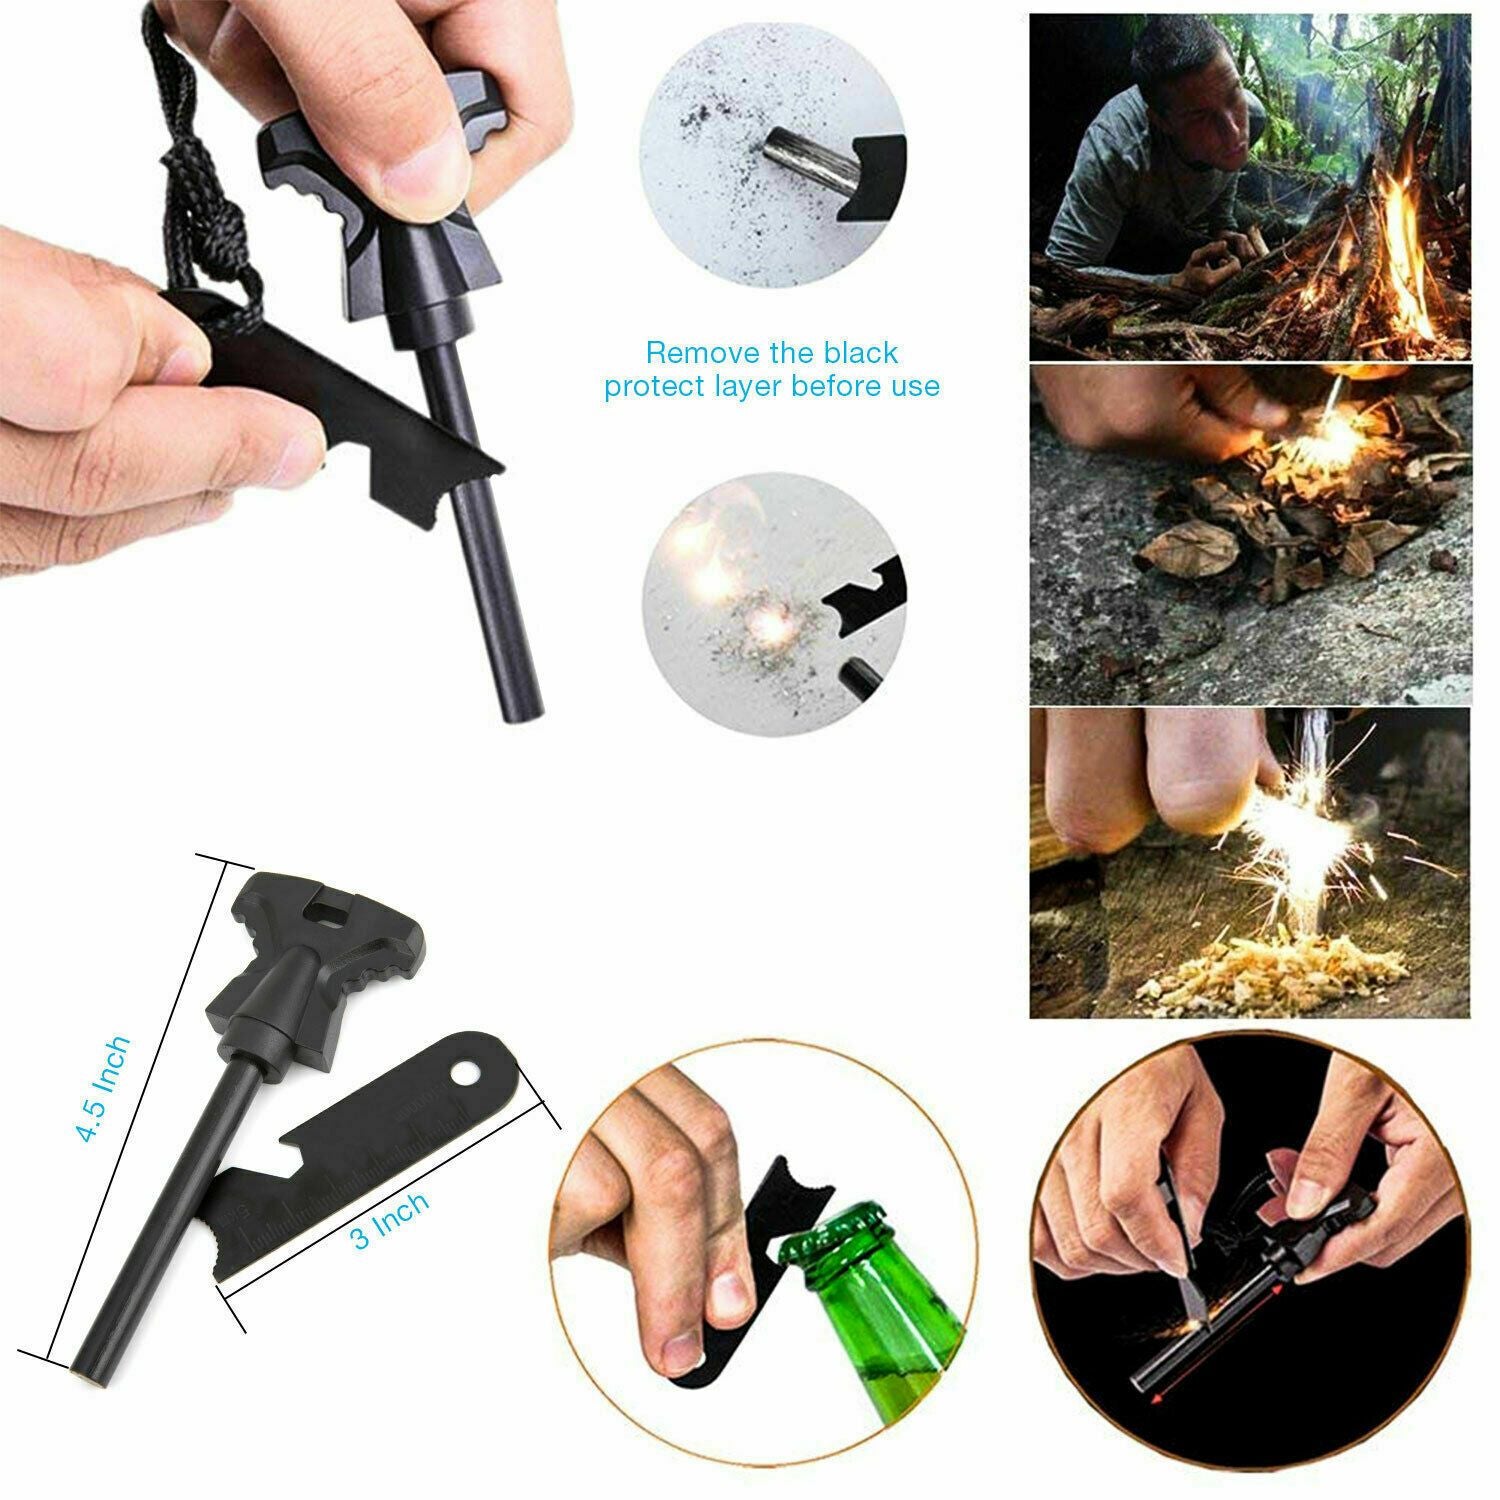 14 in 1 Outdoor Emergency Survival Gear Kit Camping Tactical Tools SOS